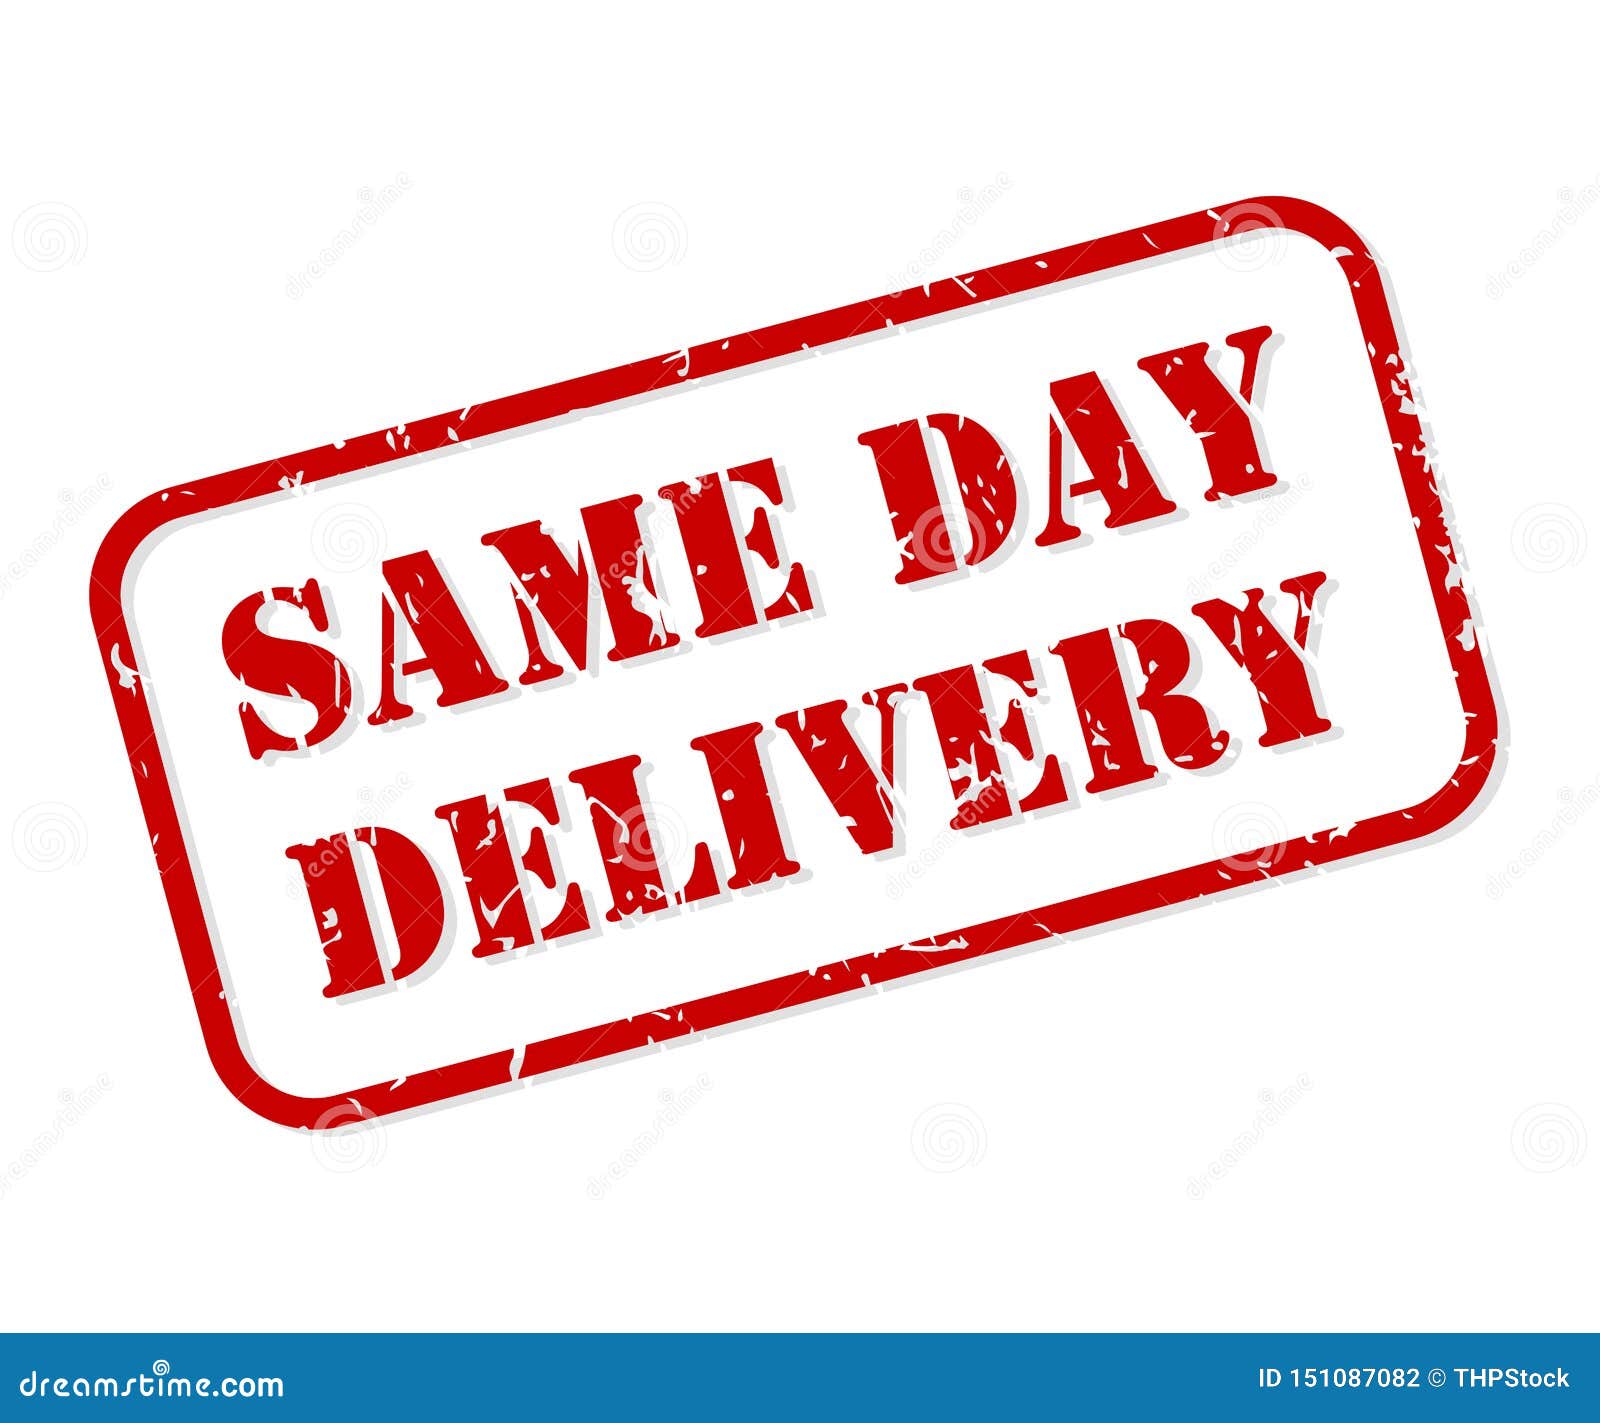 next same day delivery